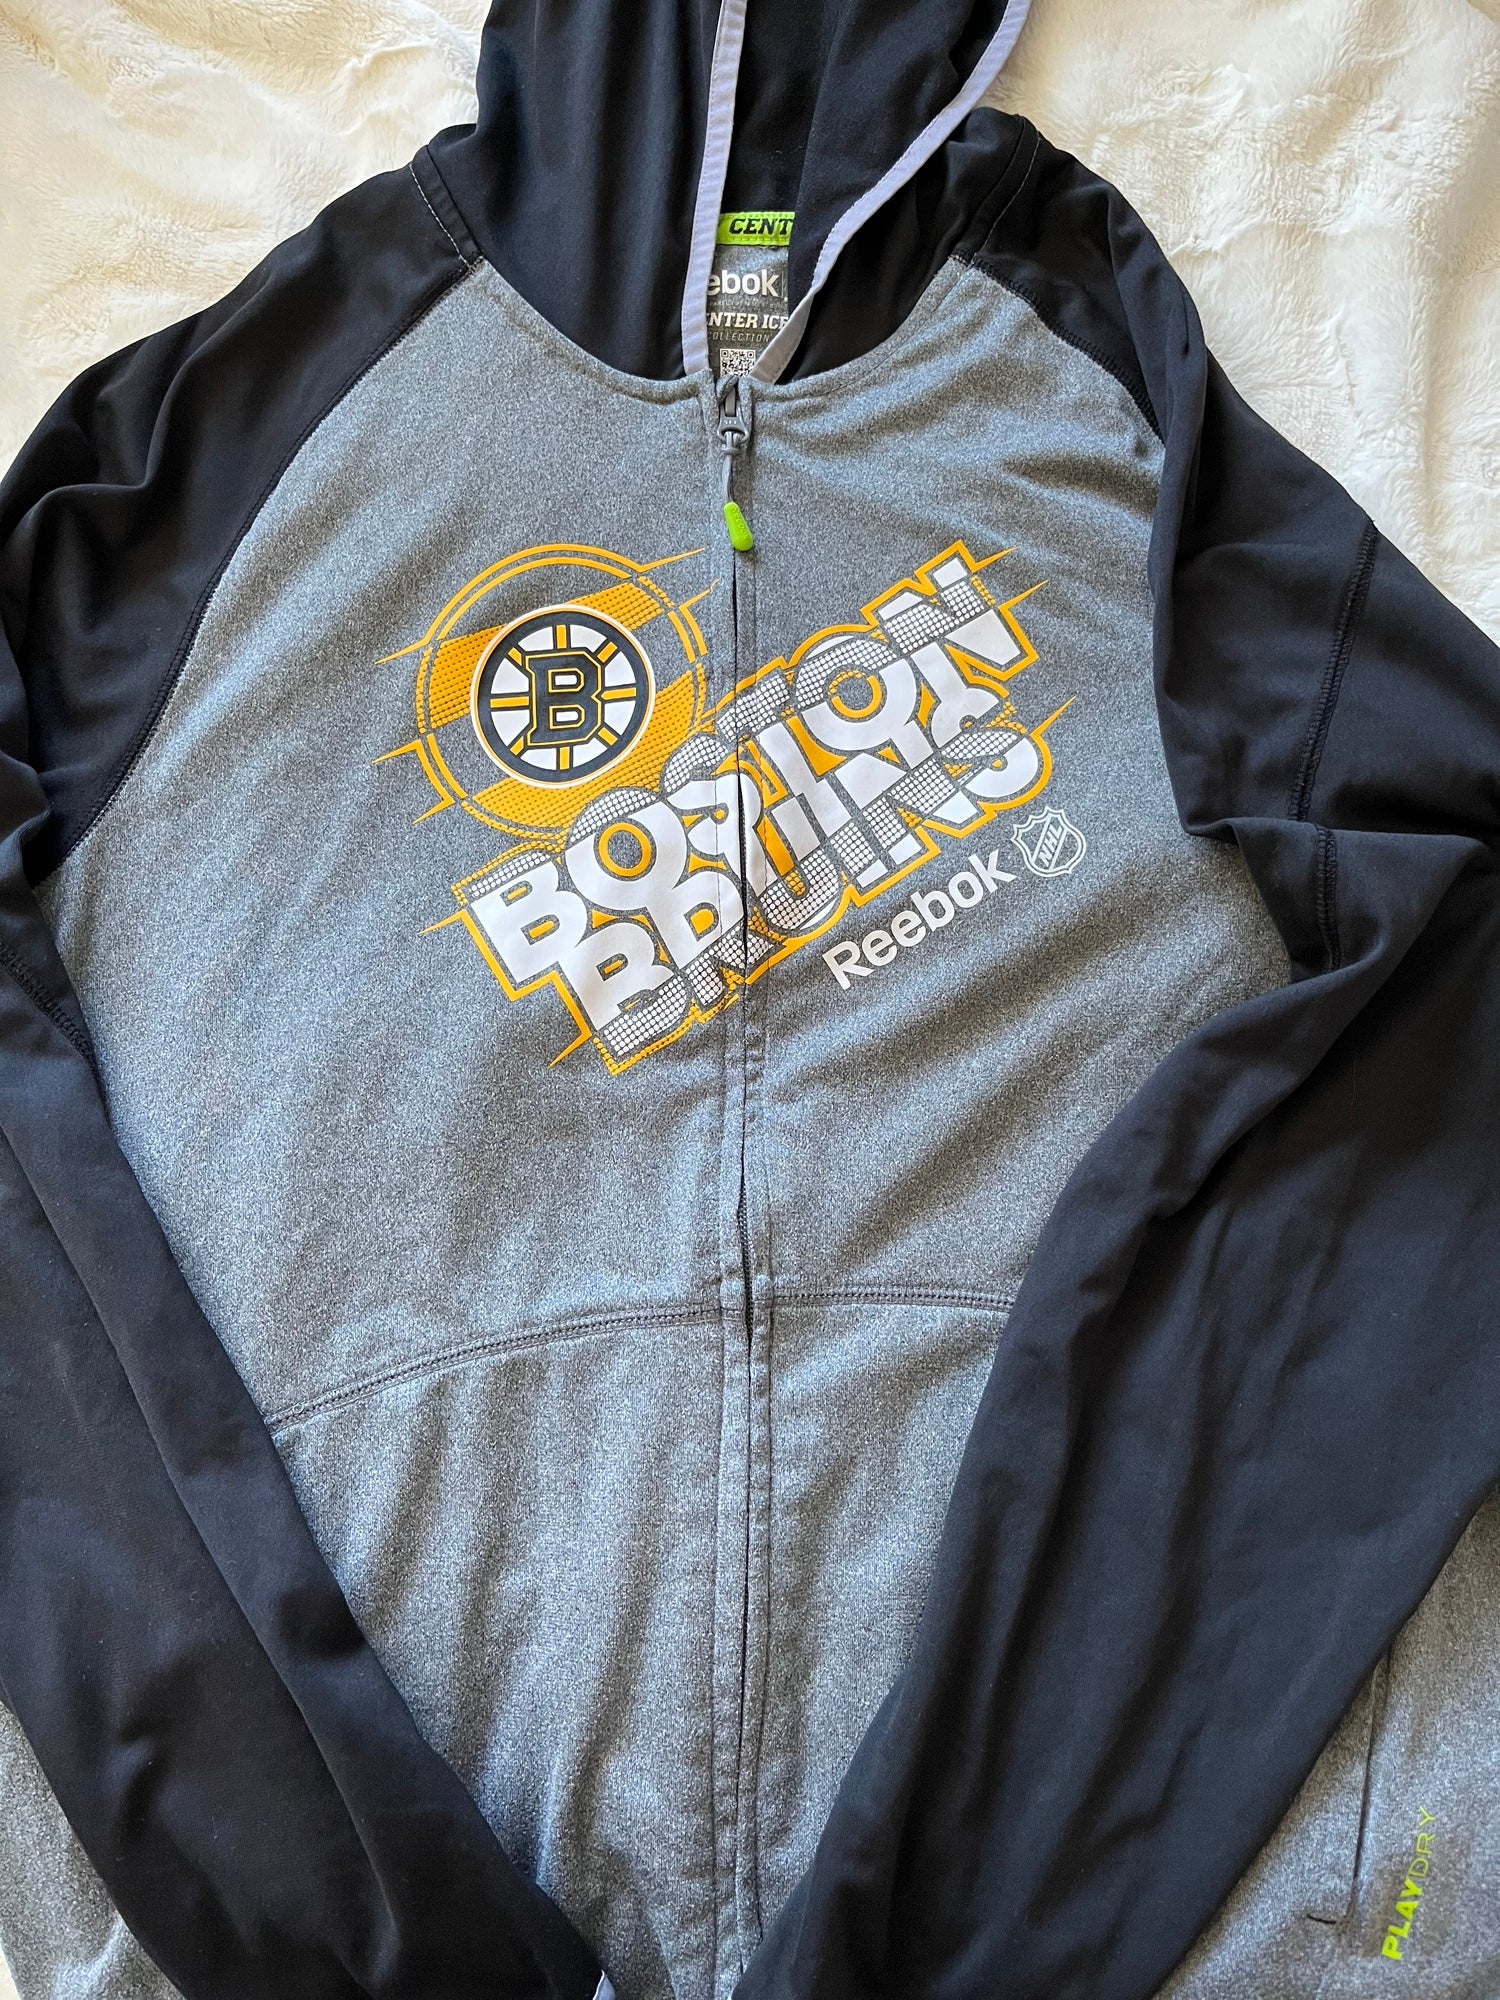 Men's Majestic Threads Patrice Bergeron Black Boston Bruins Softhand Name &  Number Pullover Hoodie